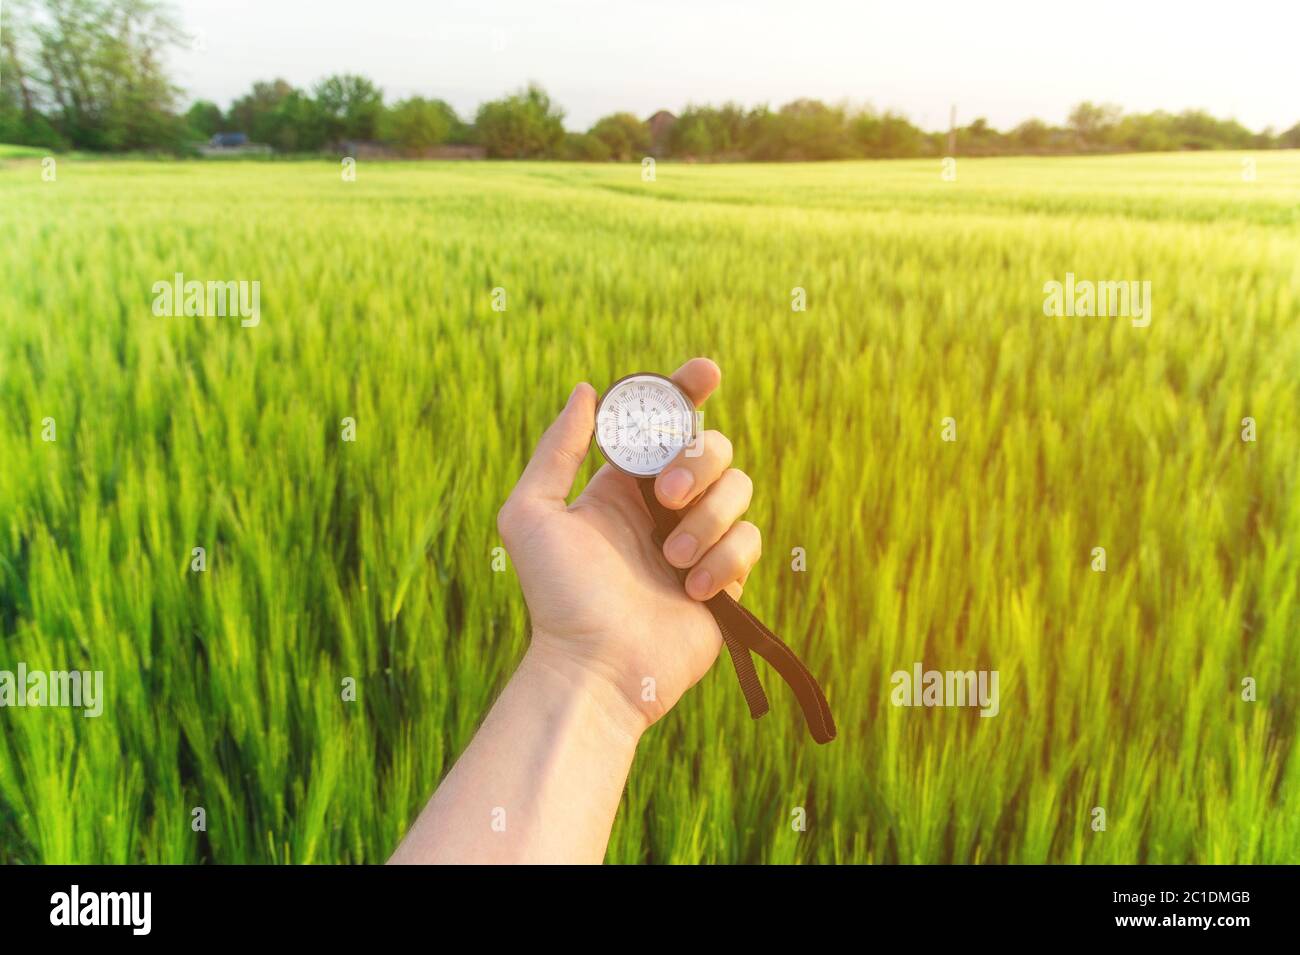 Finding a direction in nature on a wheat field. A man's hand holds a compass Stock Photo